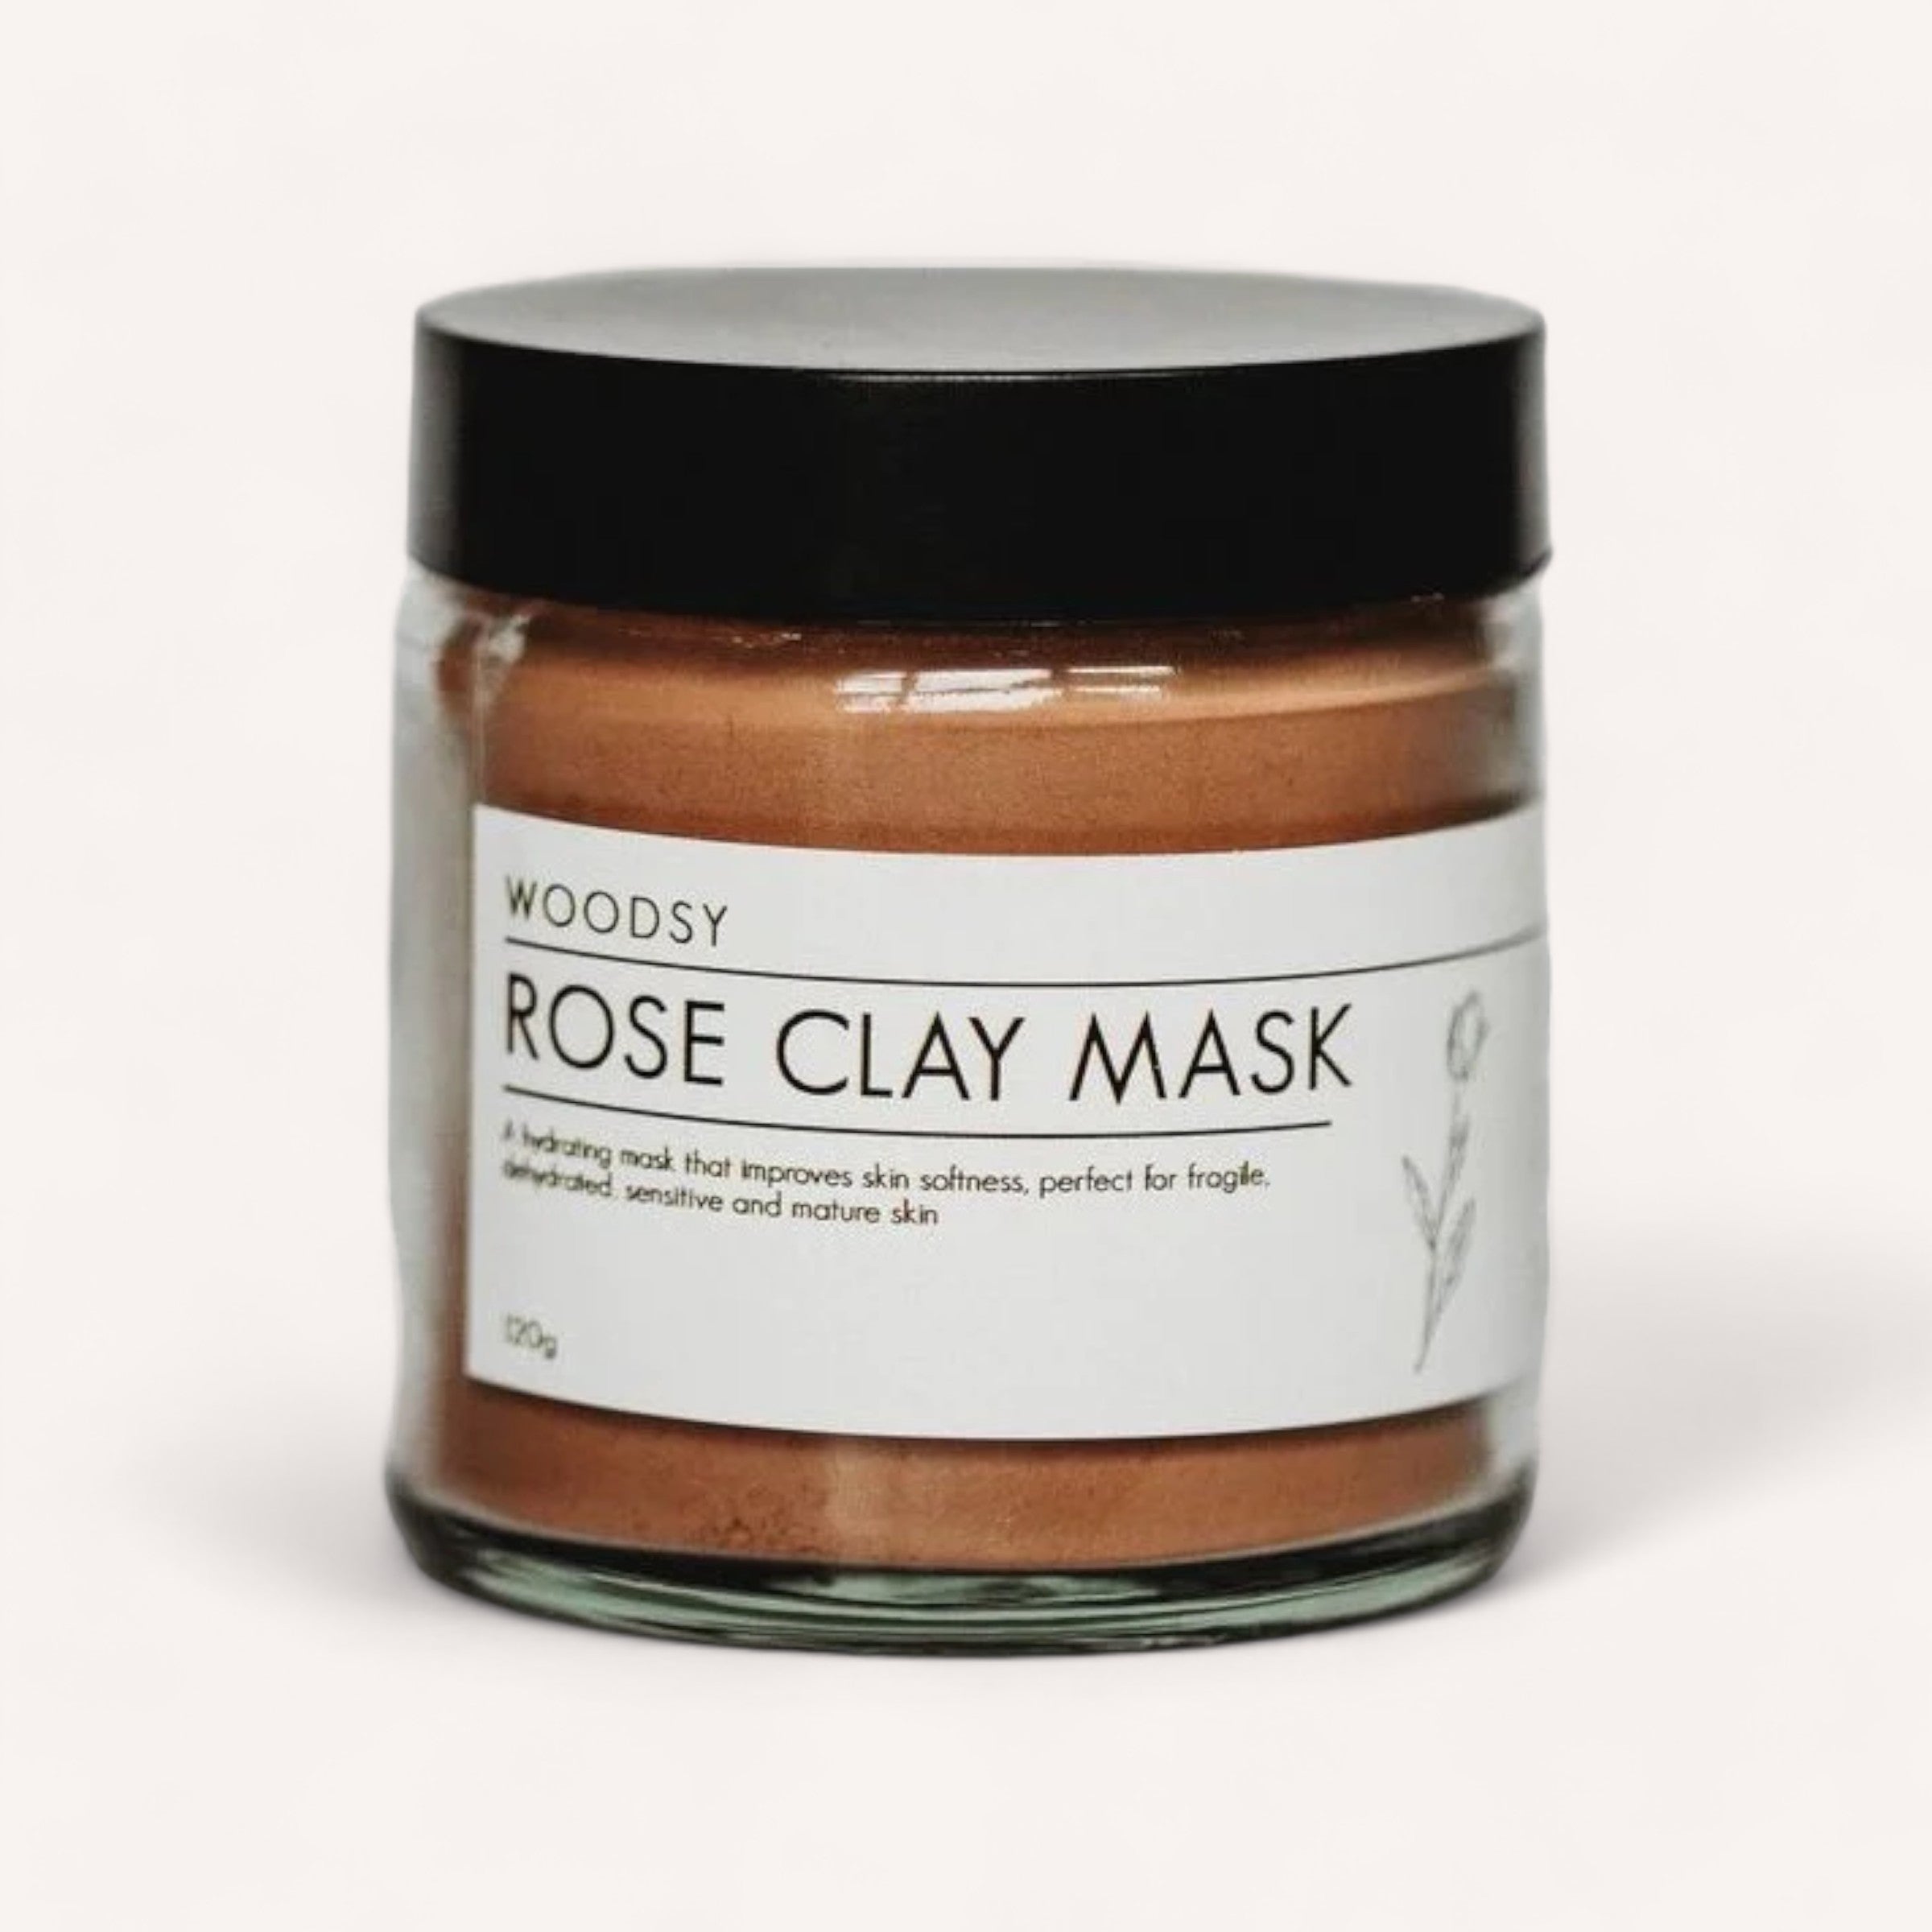 A jar of Rose Clay Mask by Woodsy Botanics for hydrating and soothing, suitable for fragile, sensitive, and mature skin.